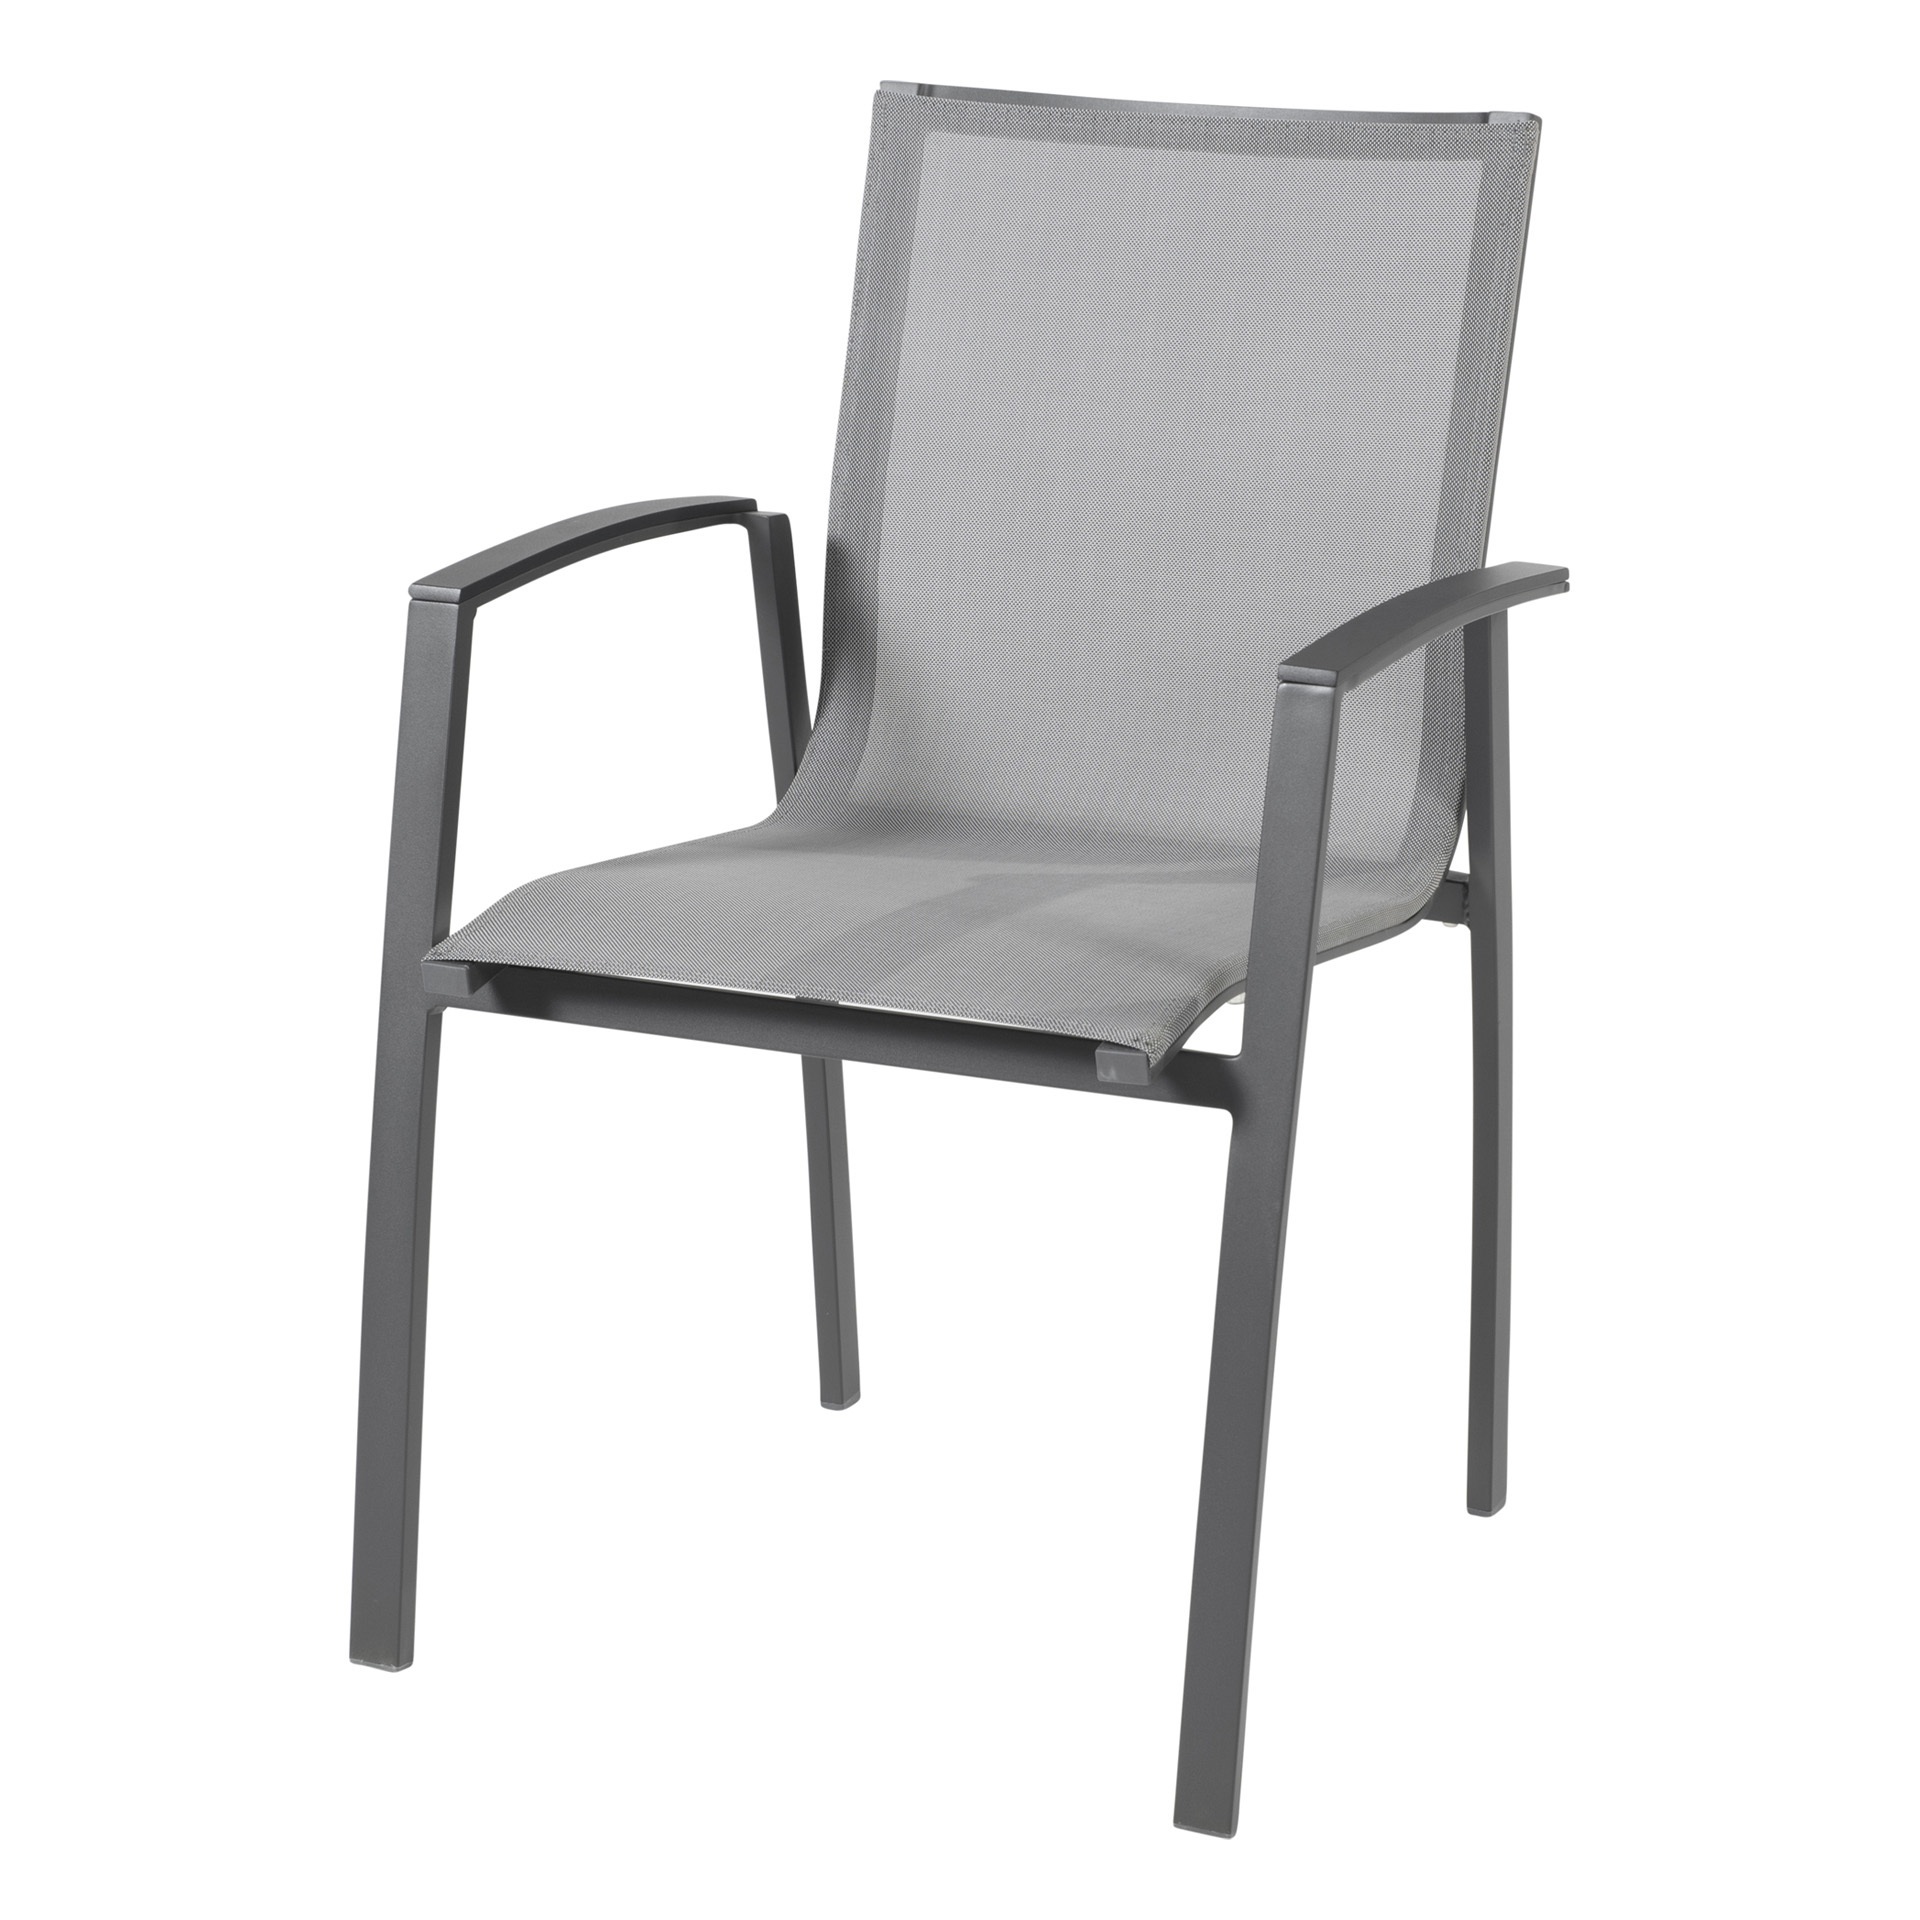 Torino dining chair stackable Antracite